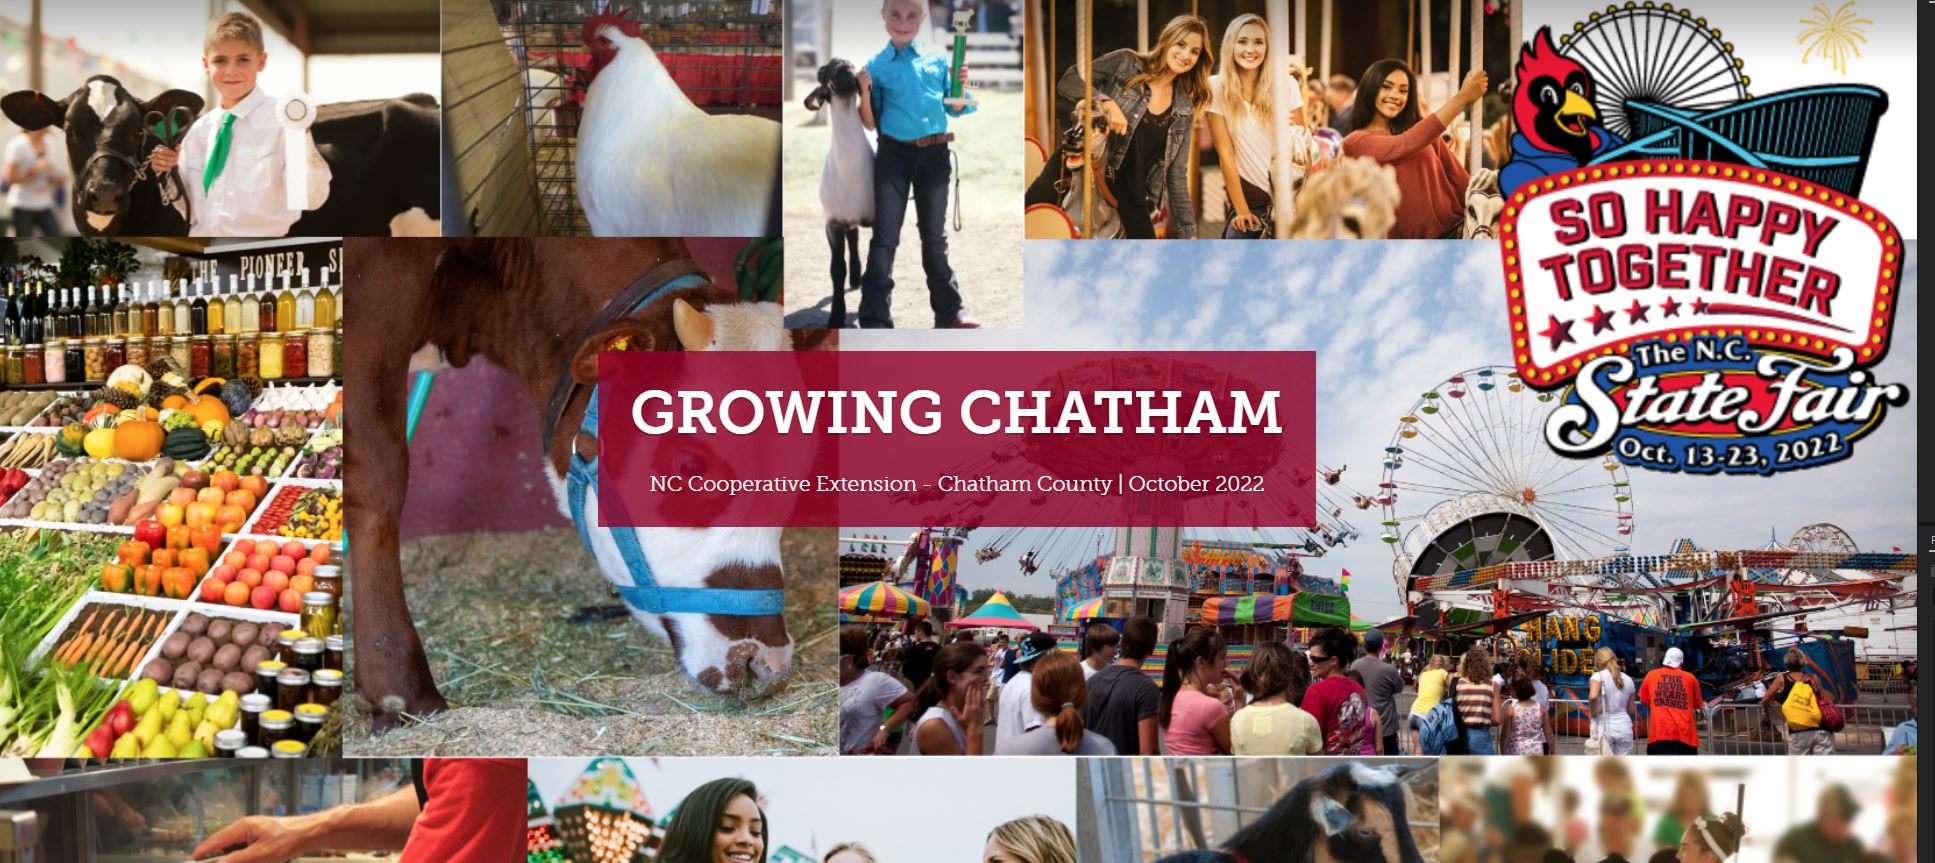 Growing Chatham with images from the N.C. State Fair in the background.